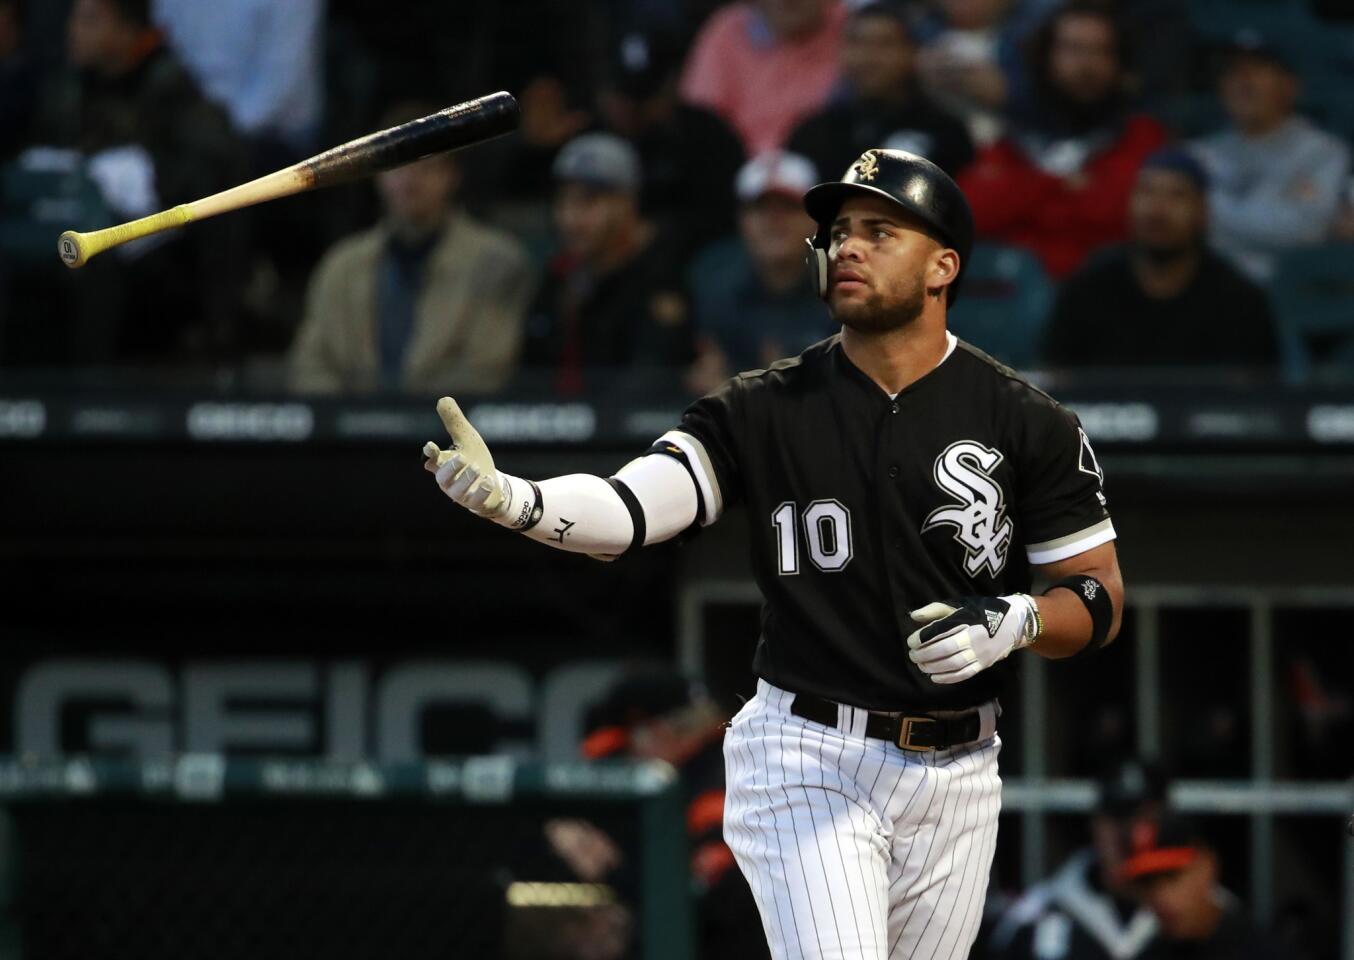 White Sox second baseman Yoan Moncada (10) flips his bat after striking out during the second inning against the Orioles at Guaranteed Rate Field on Tuesday, May 22, 2018.